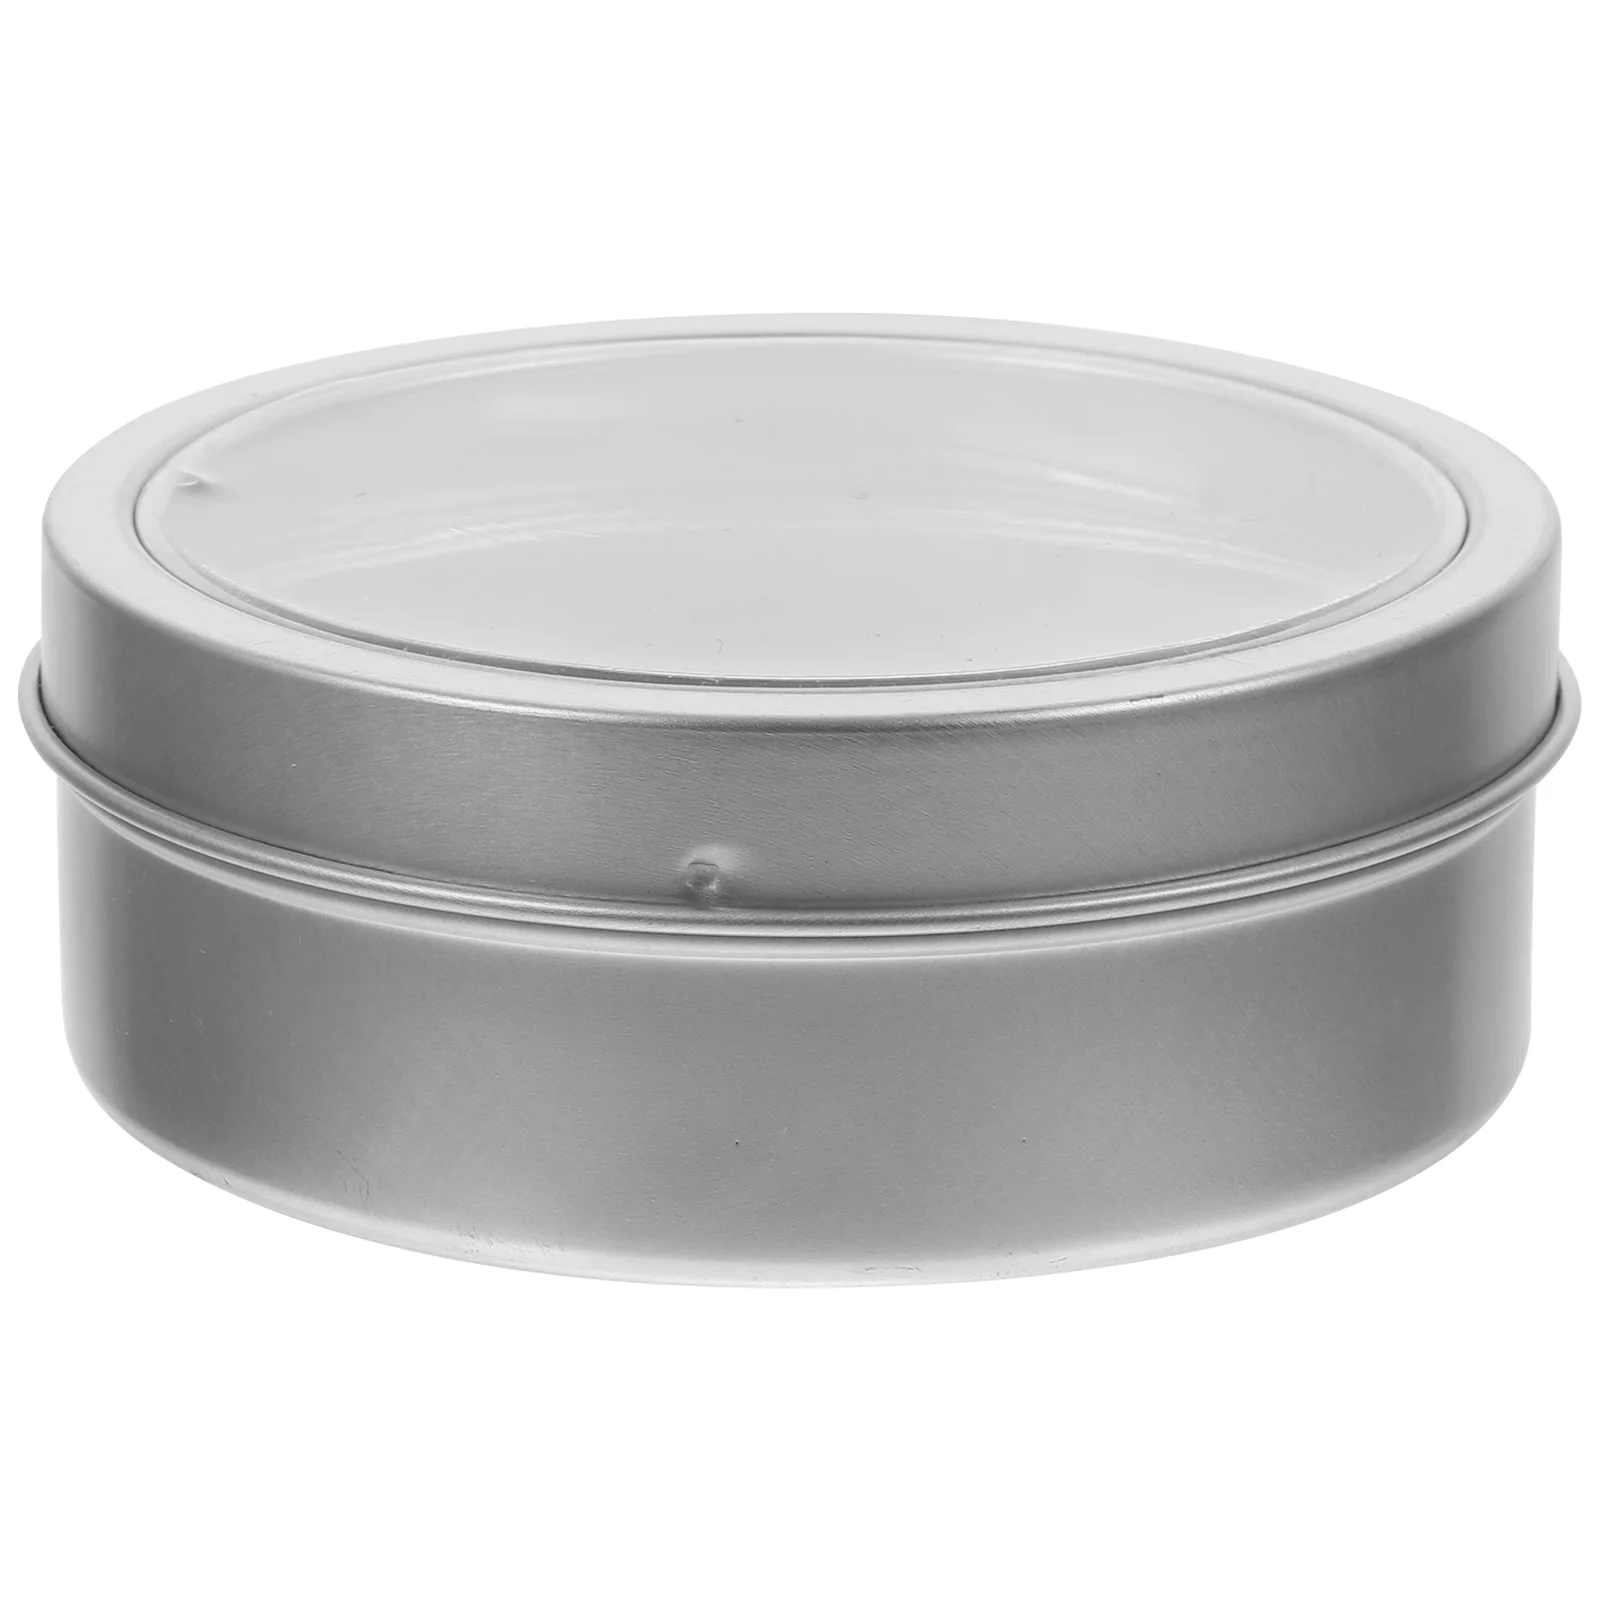 

Tin Containers Magnetic Storage Box Refrigerator Spice for Fridge Camping Jars Tins